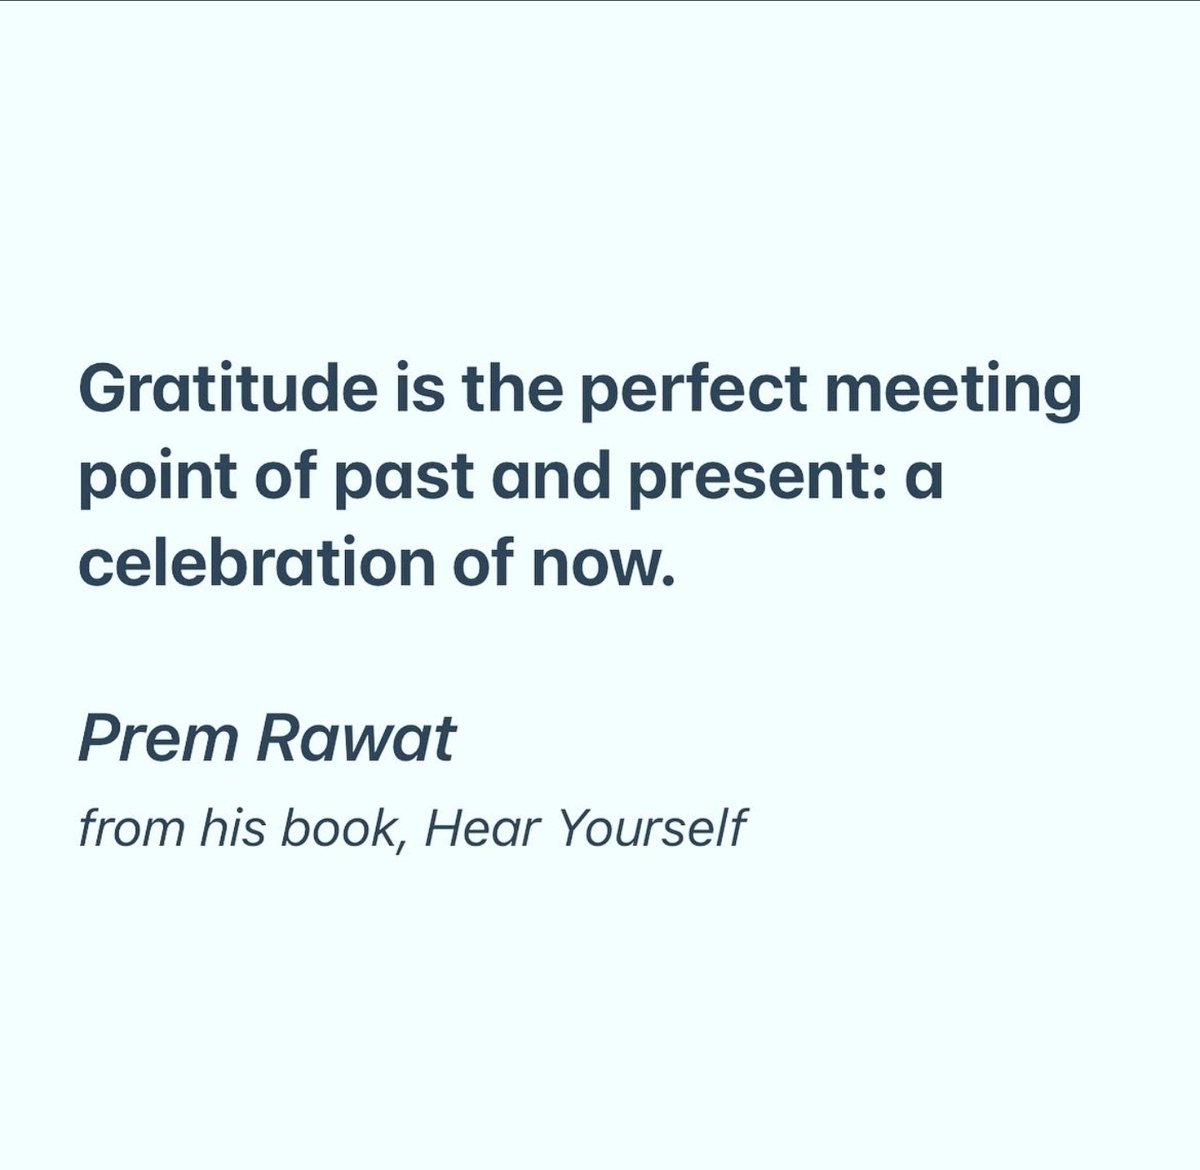 Hear Yourself by Prem Rawat - Available Now 

#PremRawat #HearYourselfBook #books #TPRF #ThePremRawatFoundation #peaceiswithinyou #peaceispossible #wopg #wordsofpeace #hope #humanity #life #light #humanity #fulfilment #fun #Feelgood #inspiration #inspired